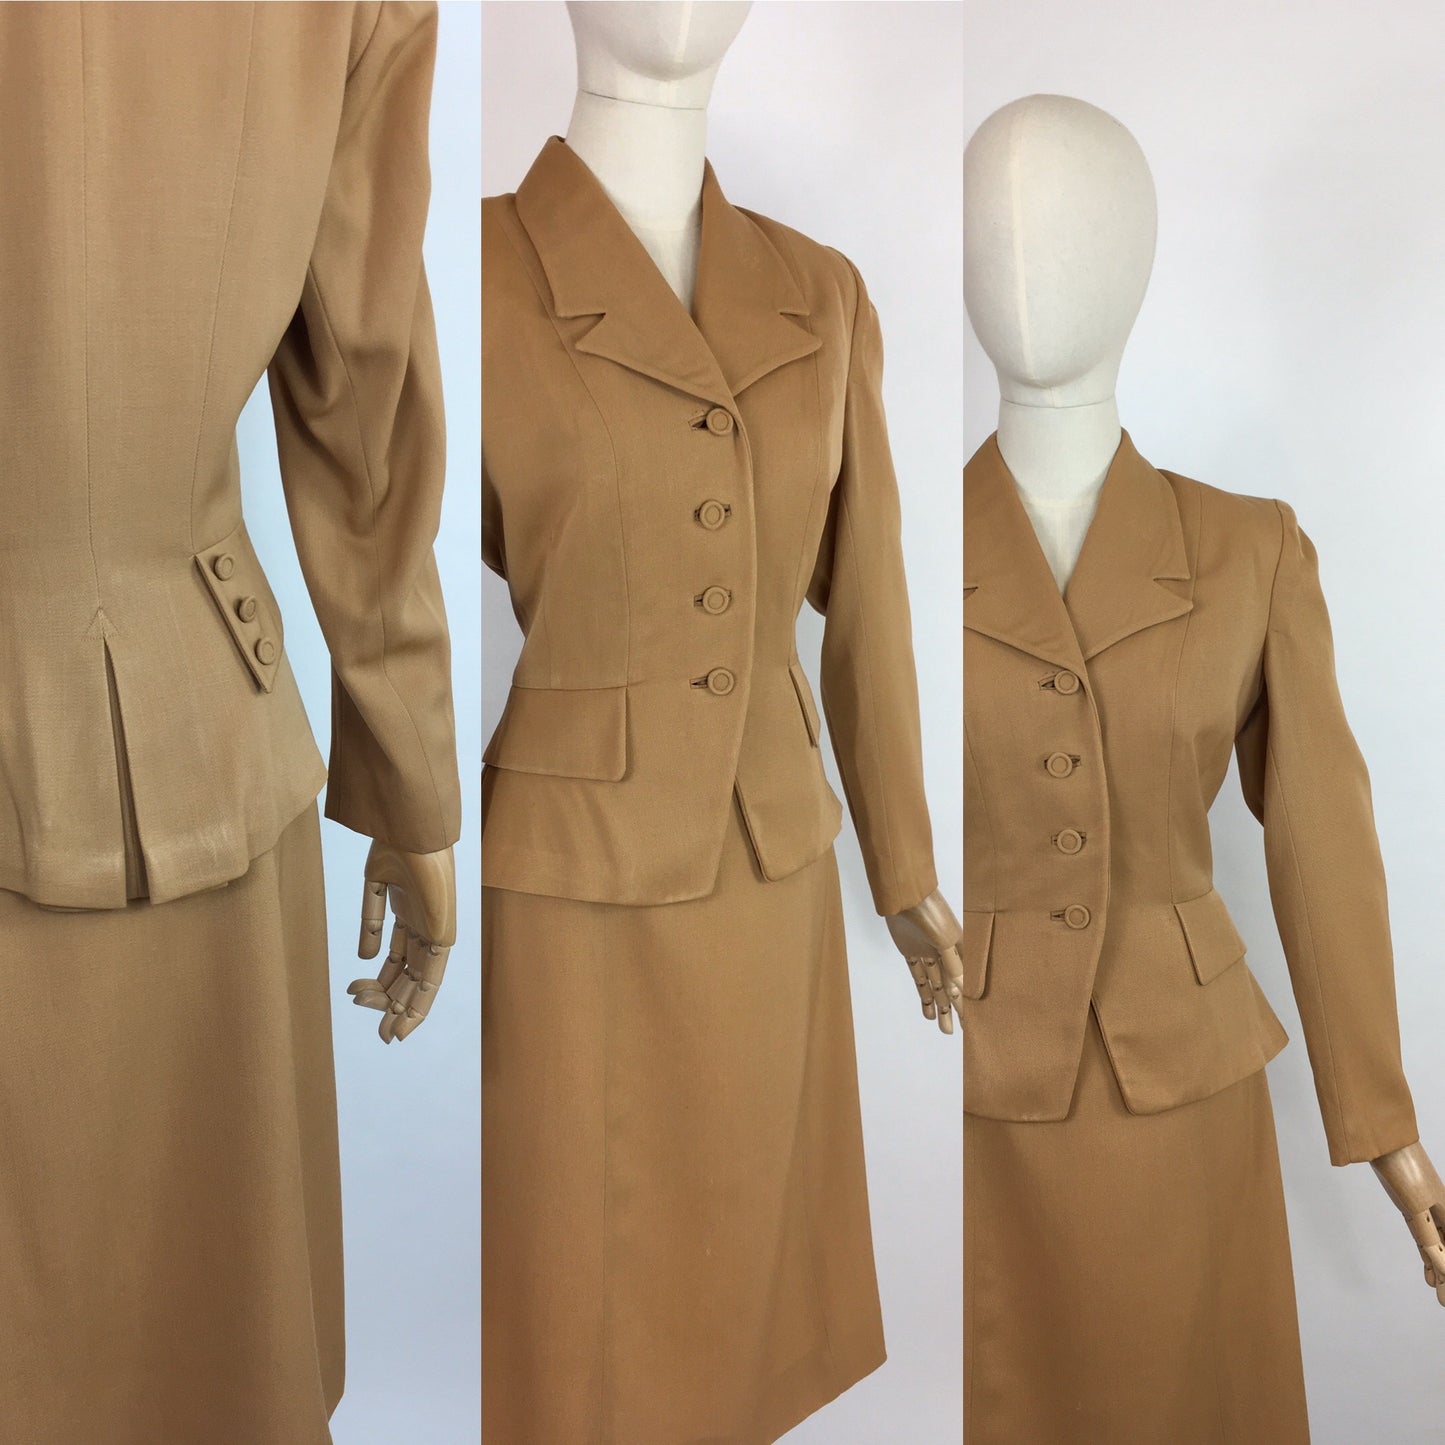 Original 1940’s 2 piece suit In A Lovely Soft Caramel Garbadine - With Amazing Arrow and Button Detailing